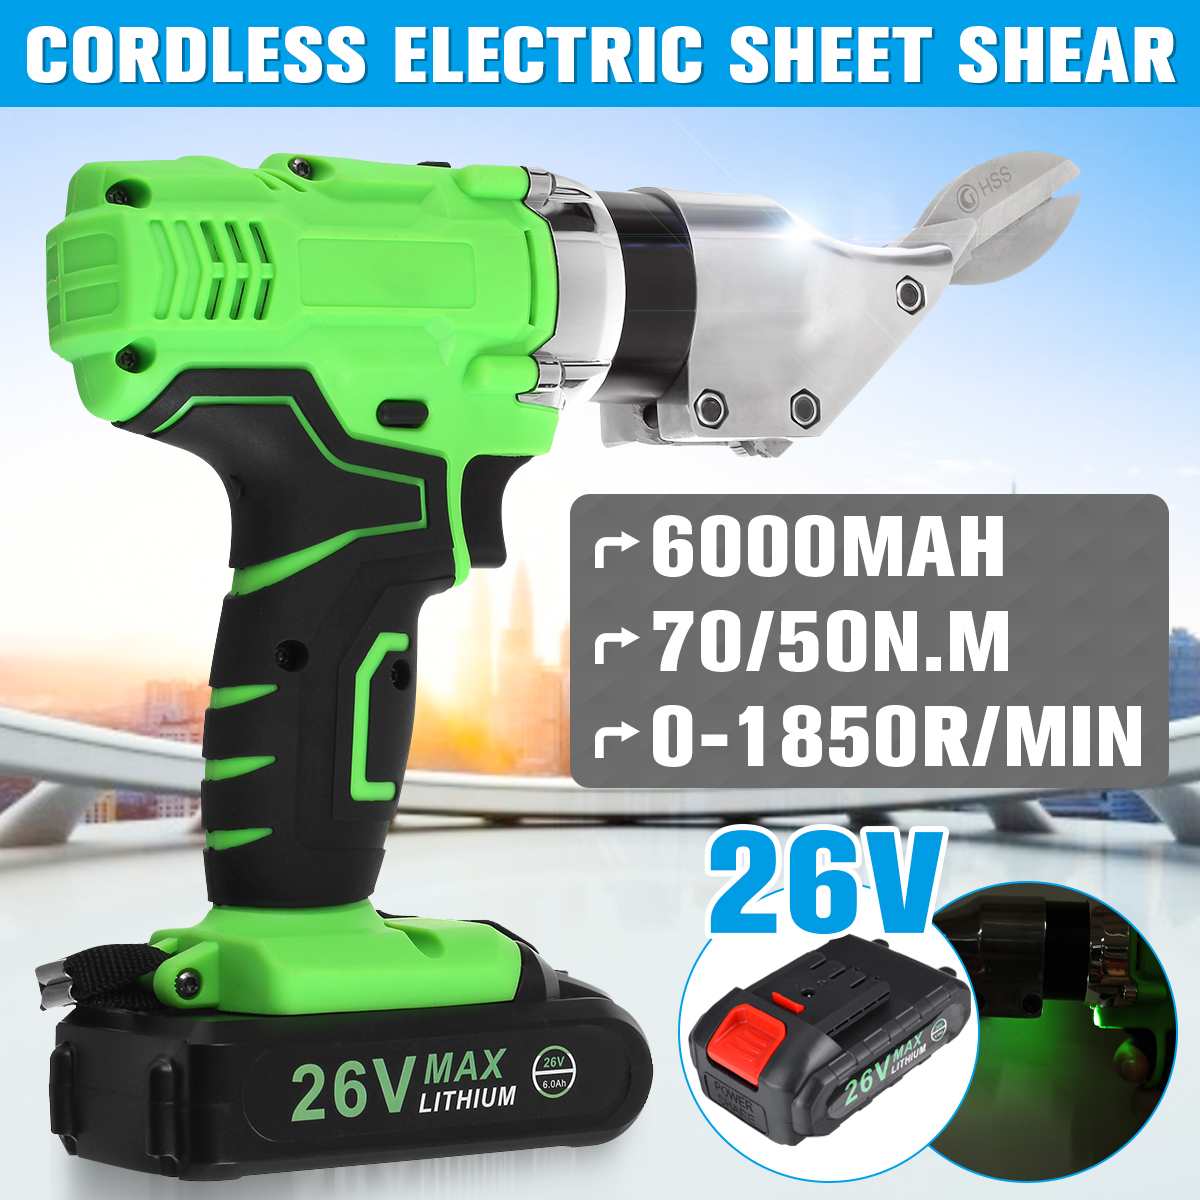 26V 990W Portable Cordless Rechargeable Electric Scissor Metal Sheet Shear Cutter Scissors Power Tool 26V With 6000mAh Battery